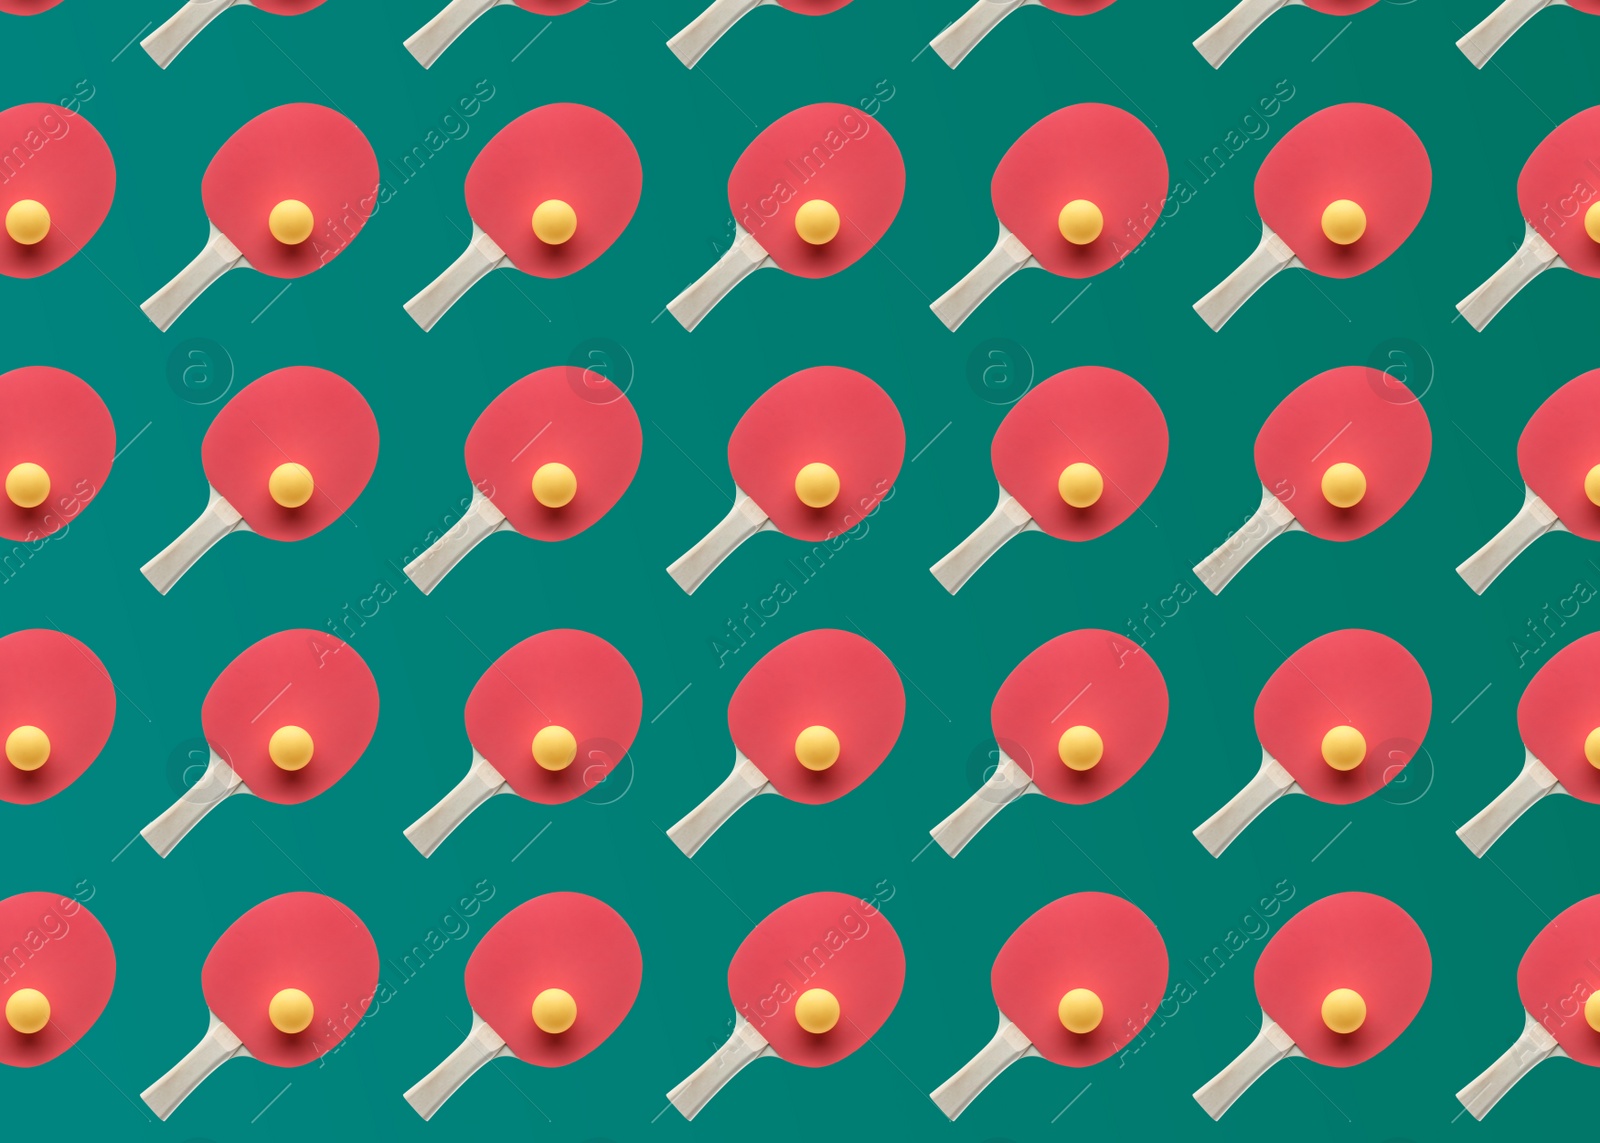 Image of Table tennis paddles and balls on color background, flat lay